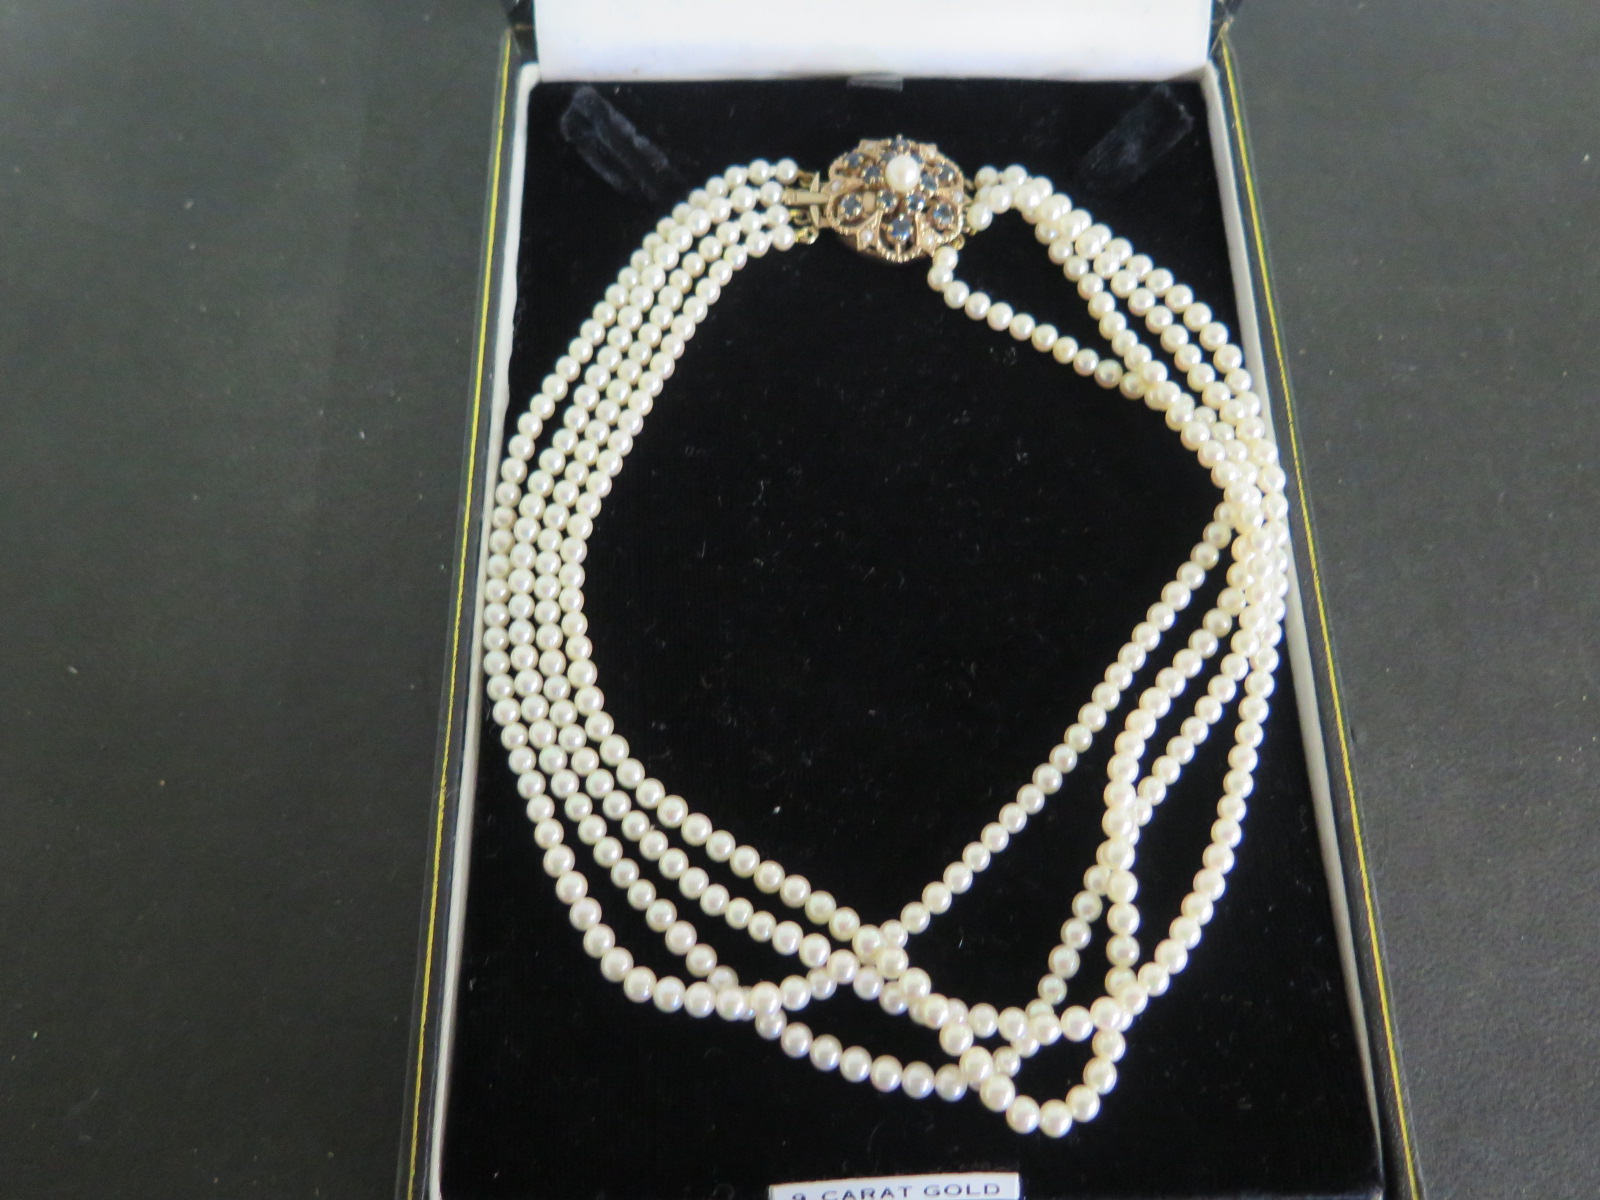 A four string pearl choker with 9ct gold clasp - 34cm long - in good condition - pearls